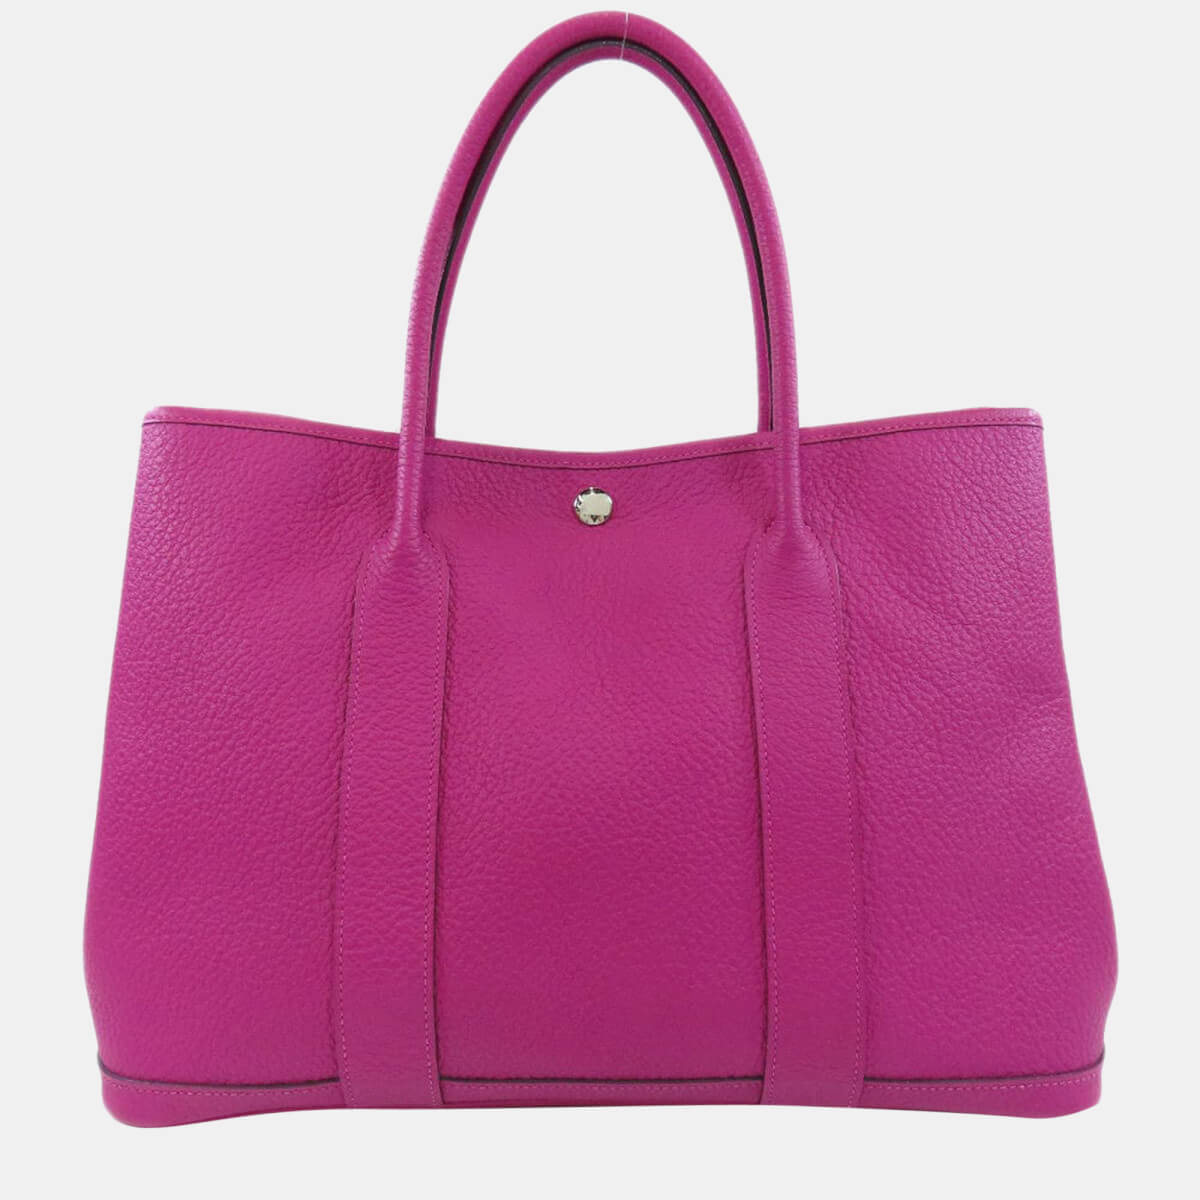 Hermes Garden PM Rose Purple Tote Bag Country Women's